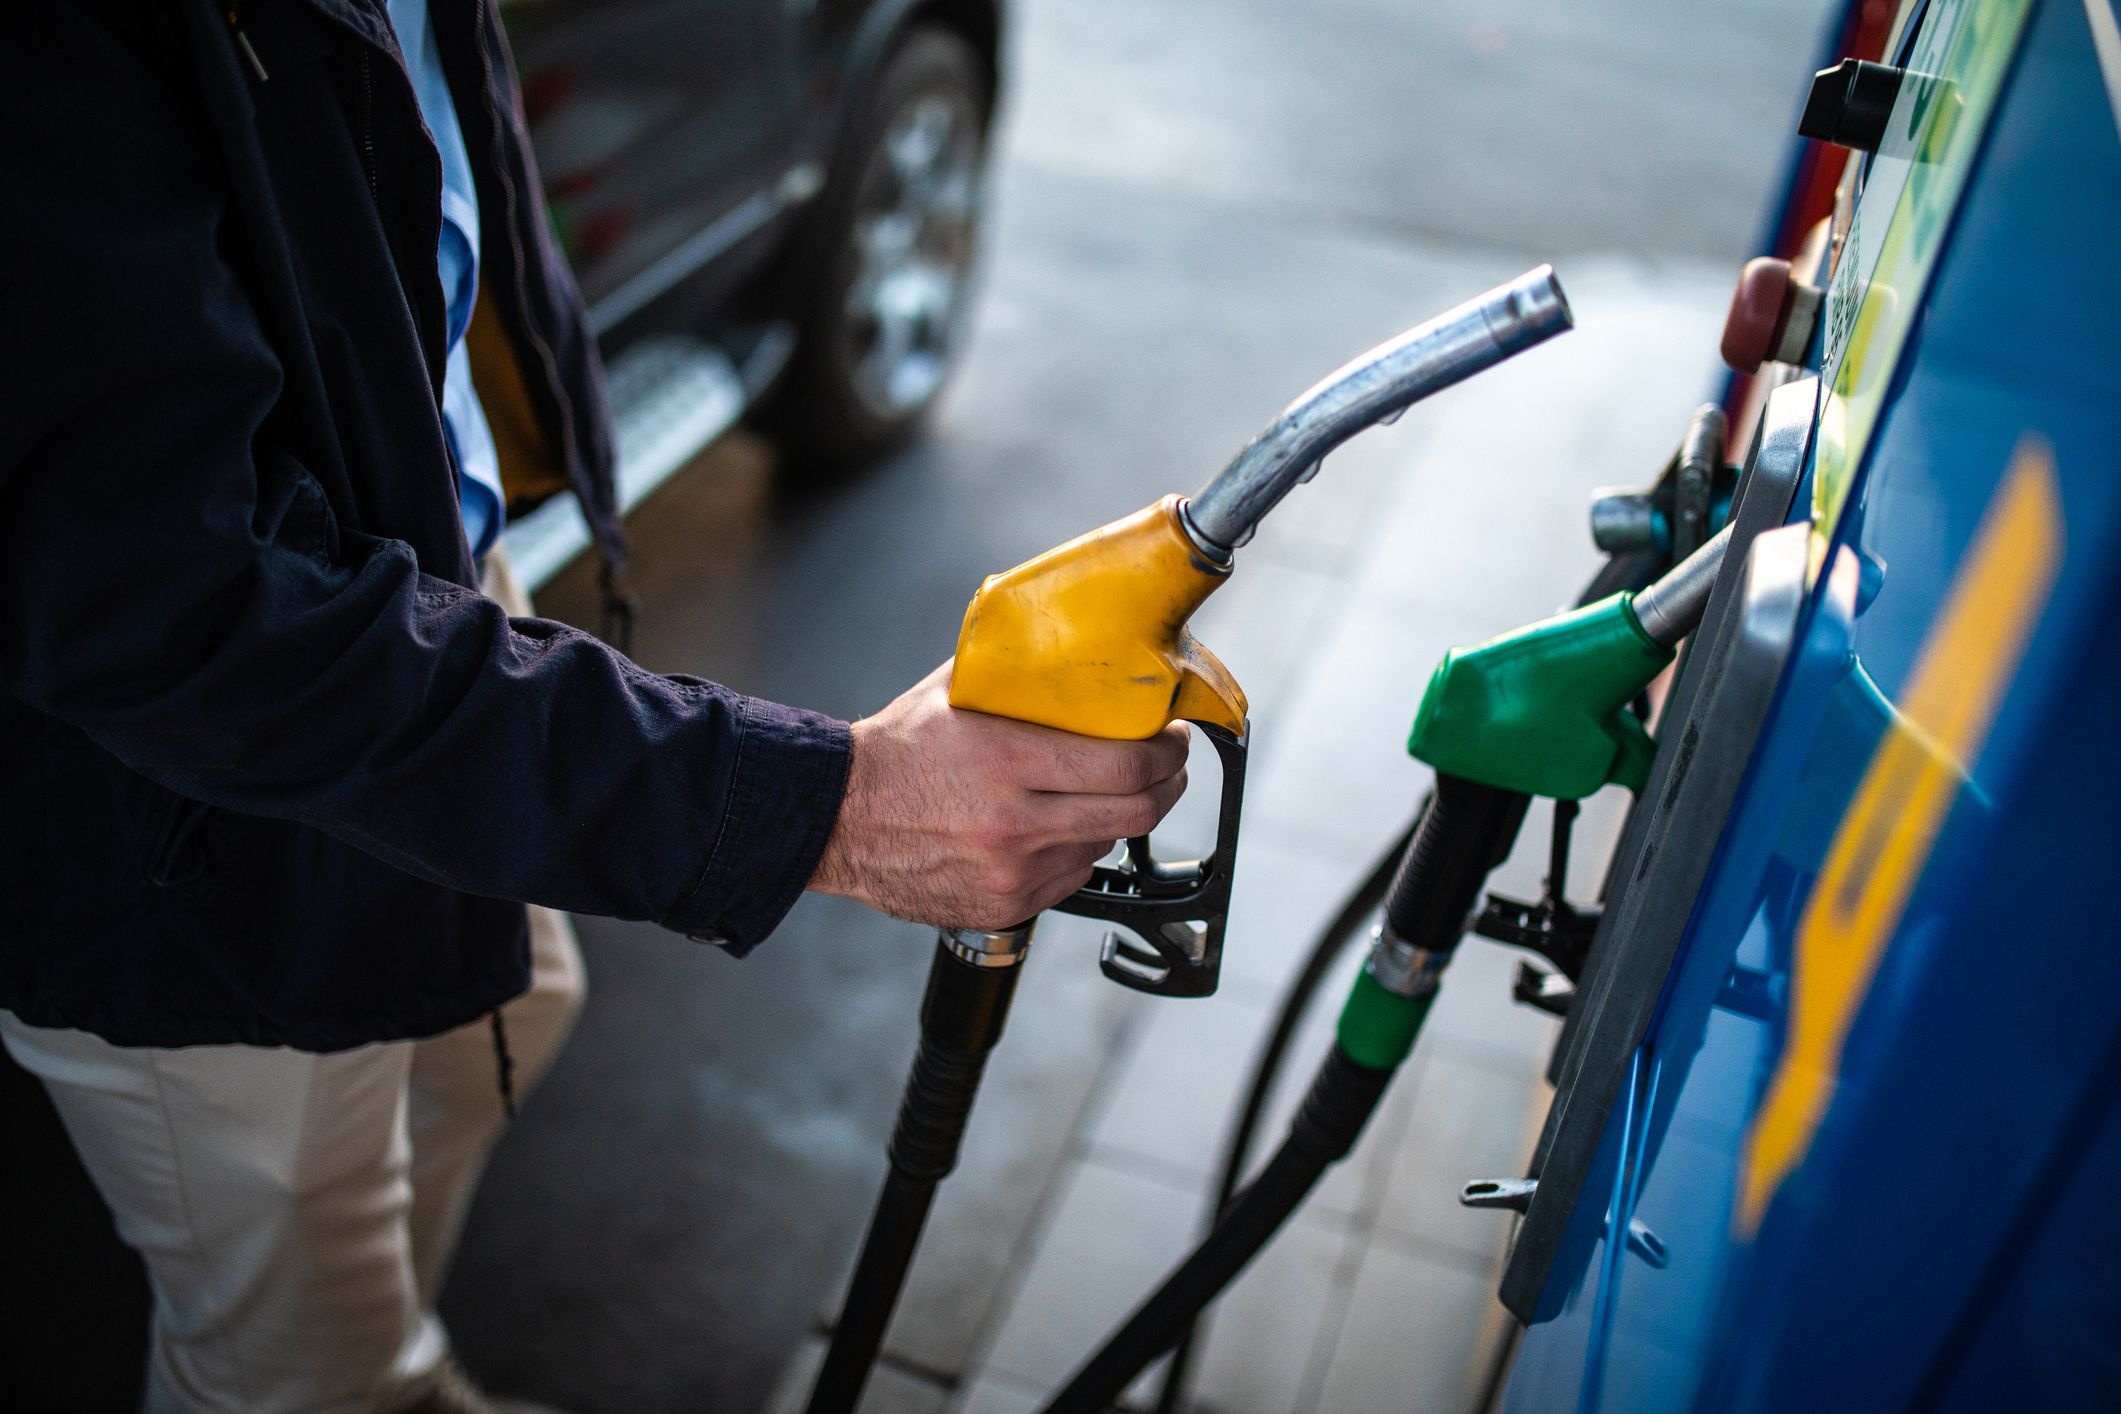 Biodiesel production is on the rise